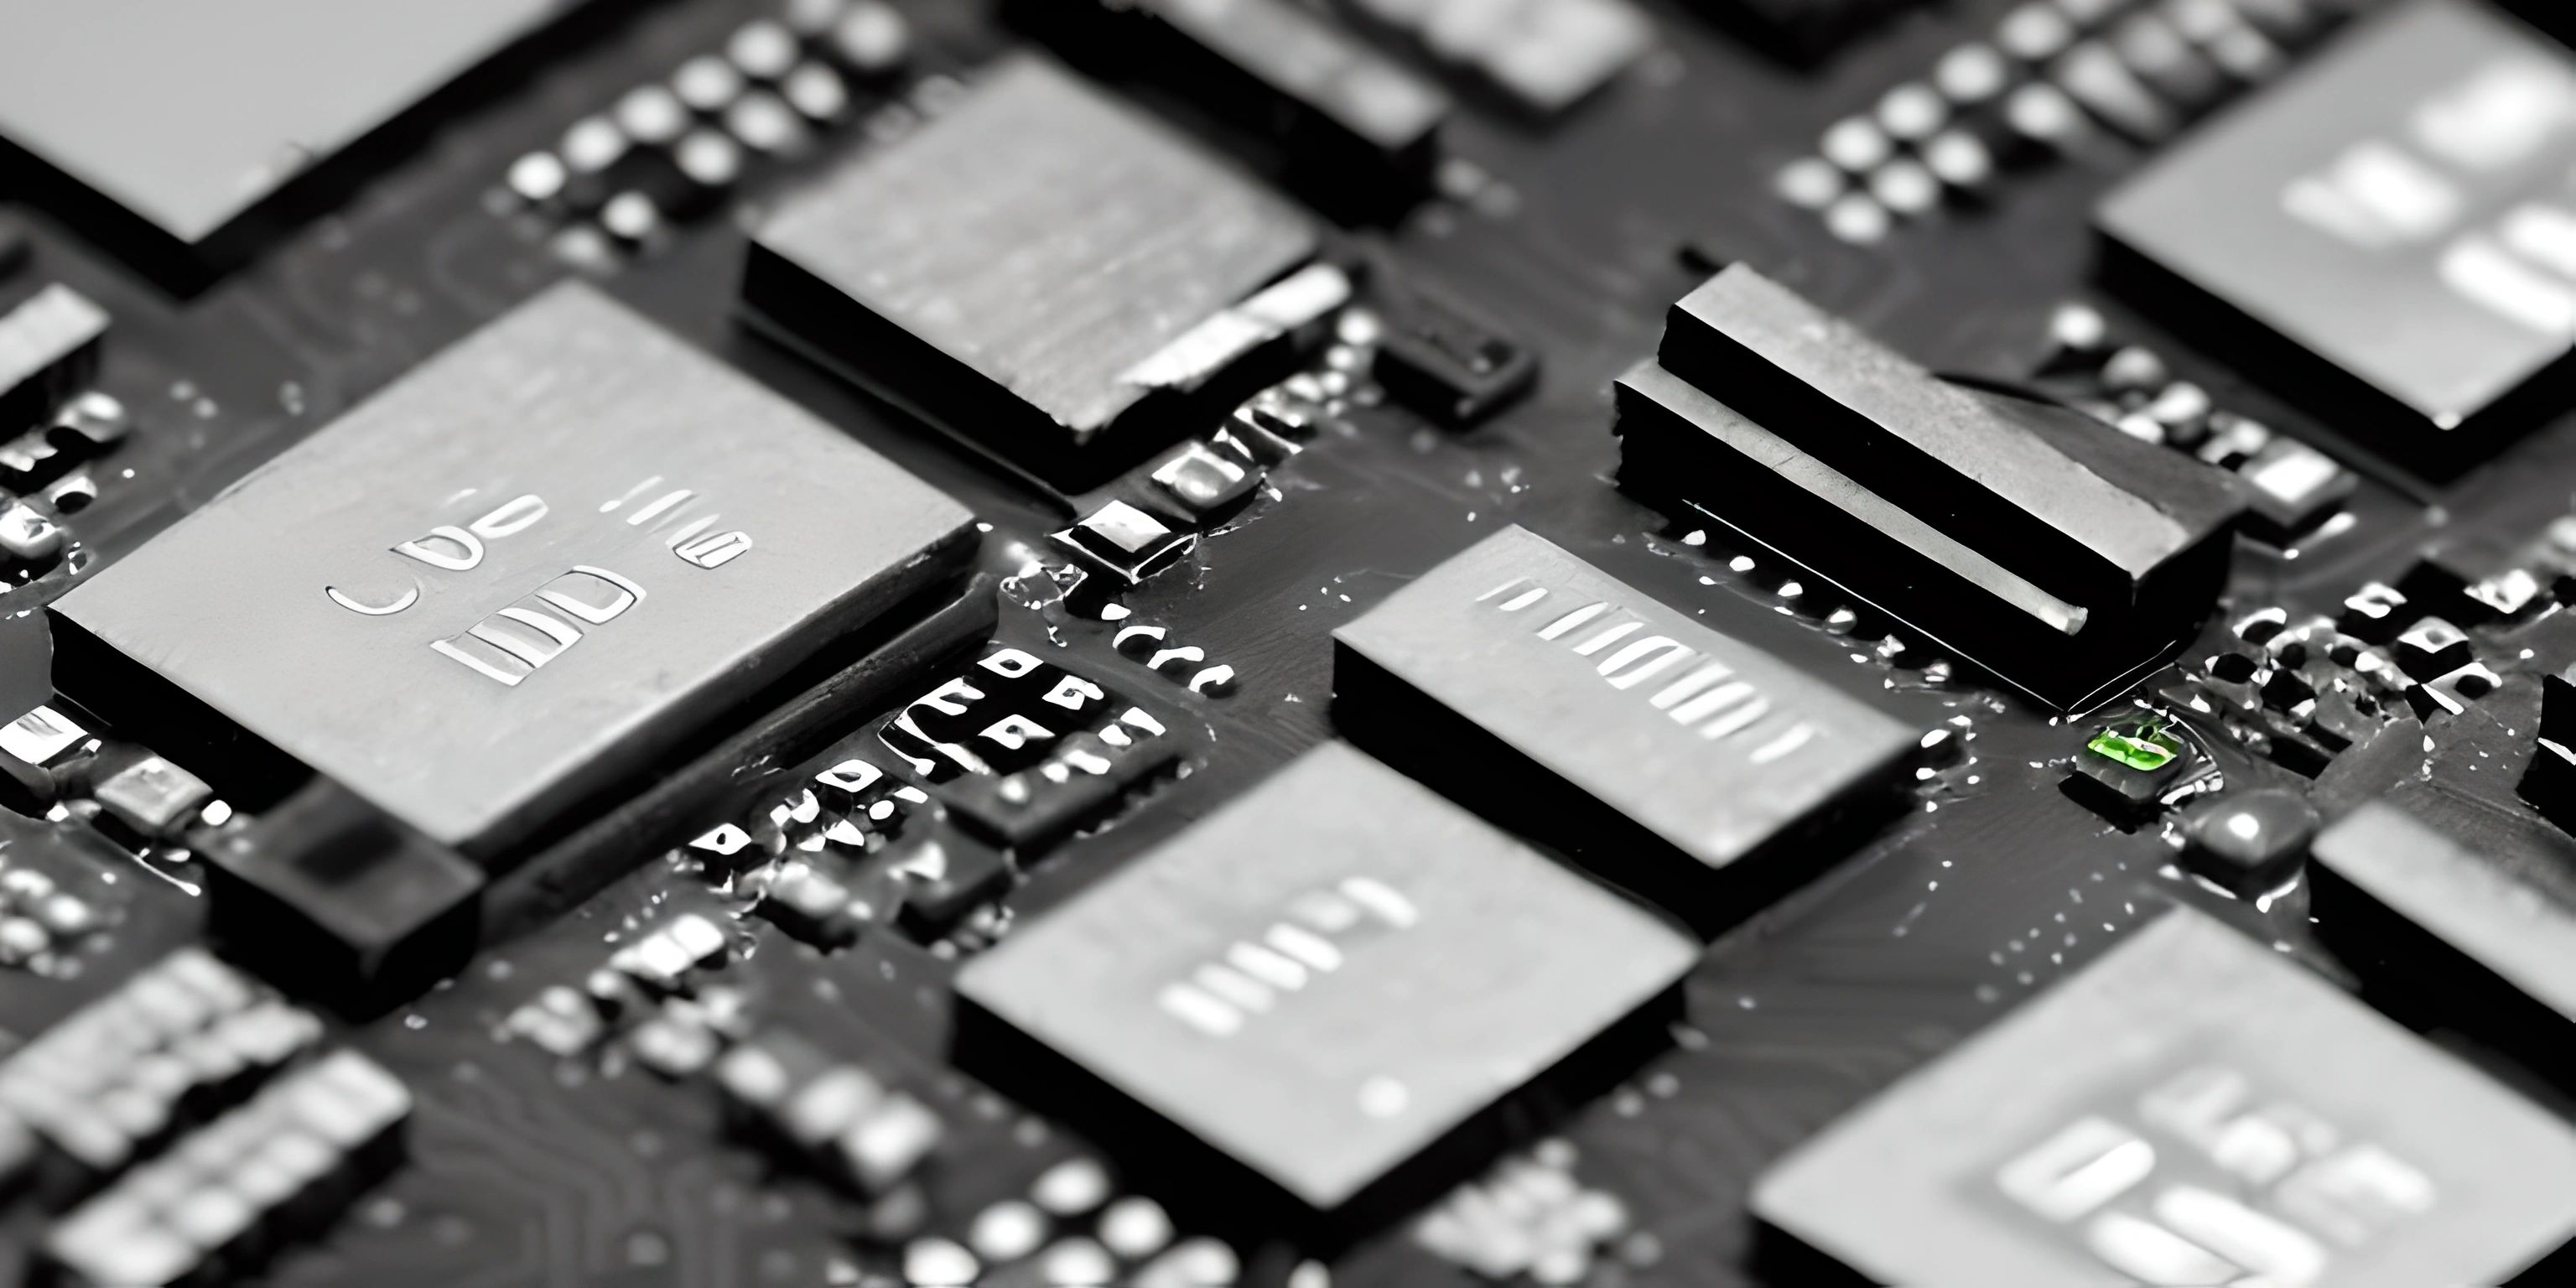 electronic components layed out on a surface for use in a black and white photo